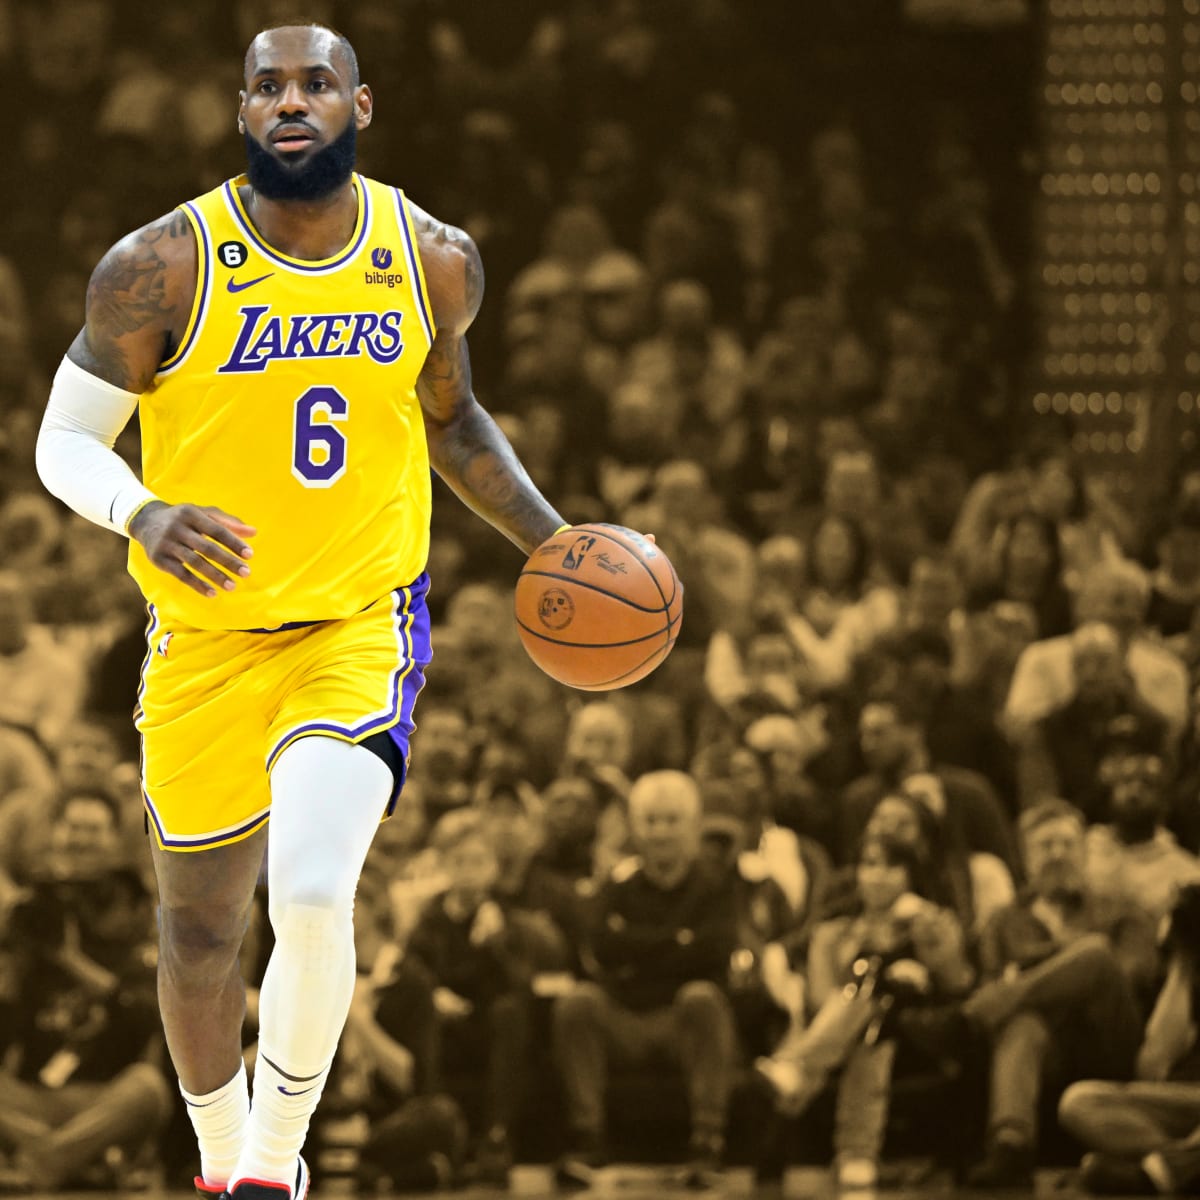 LeBron James changing his jersey number, a timeline of 23 to 6 and